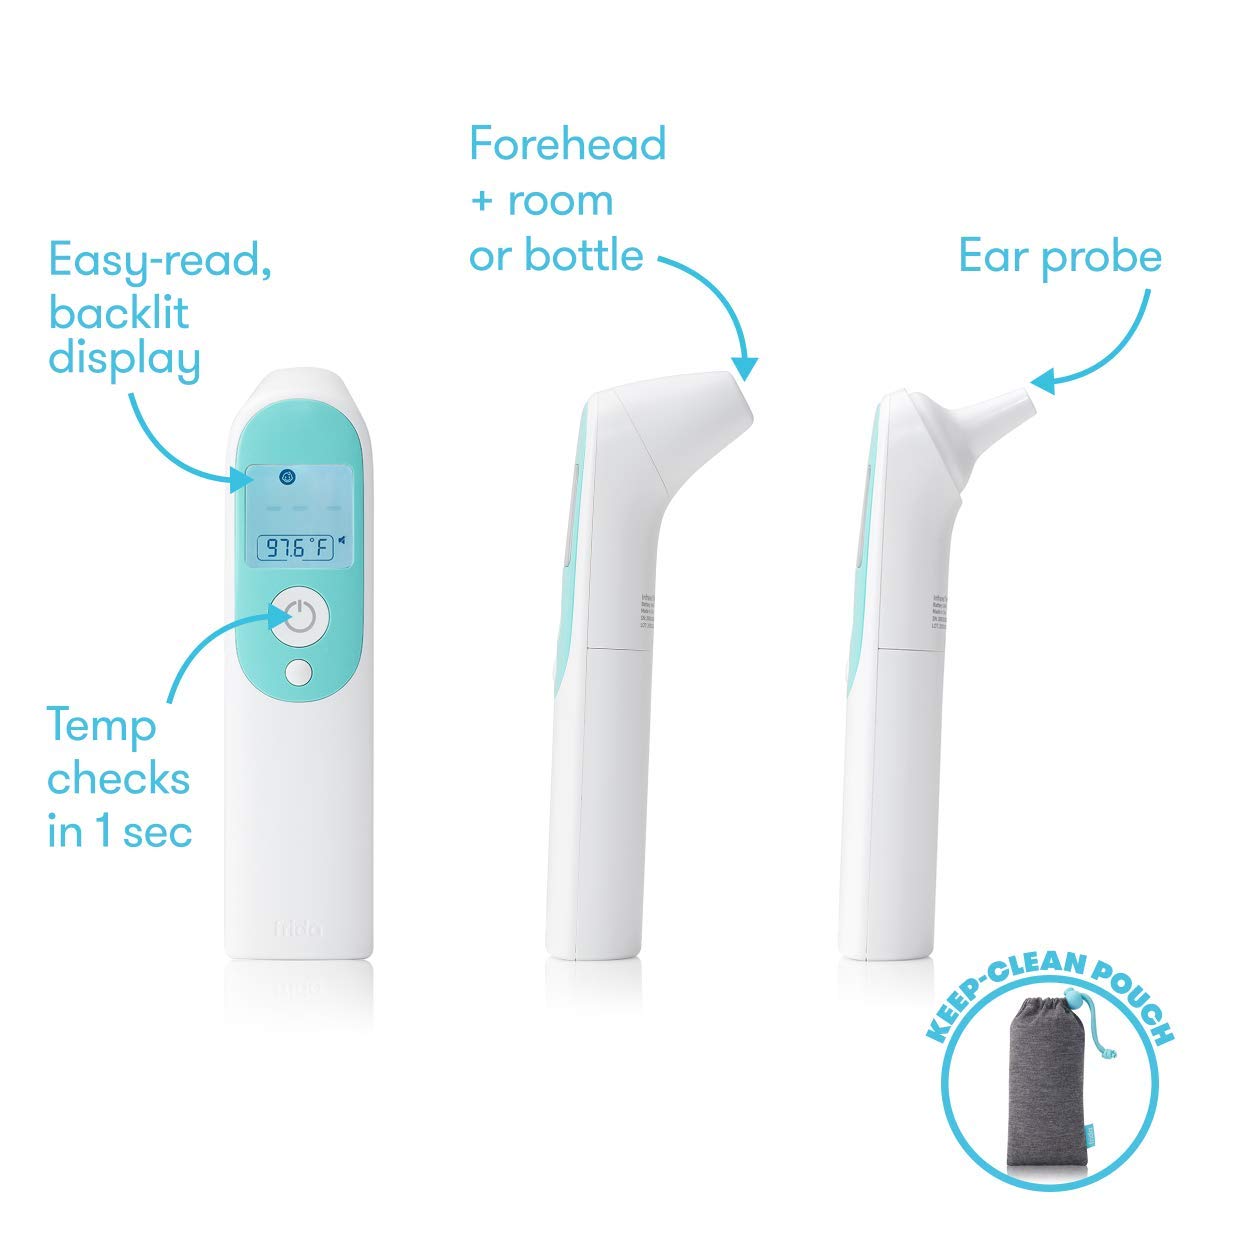 3-in-1 Touchless Thermometer